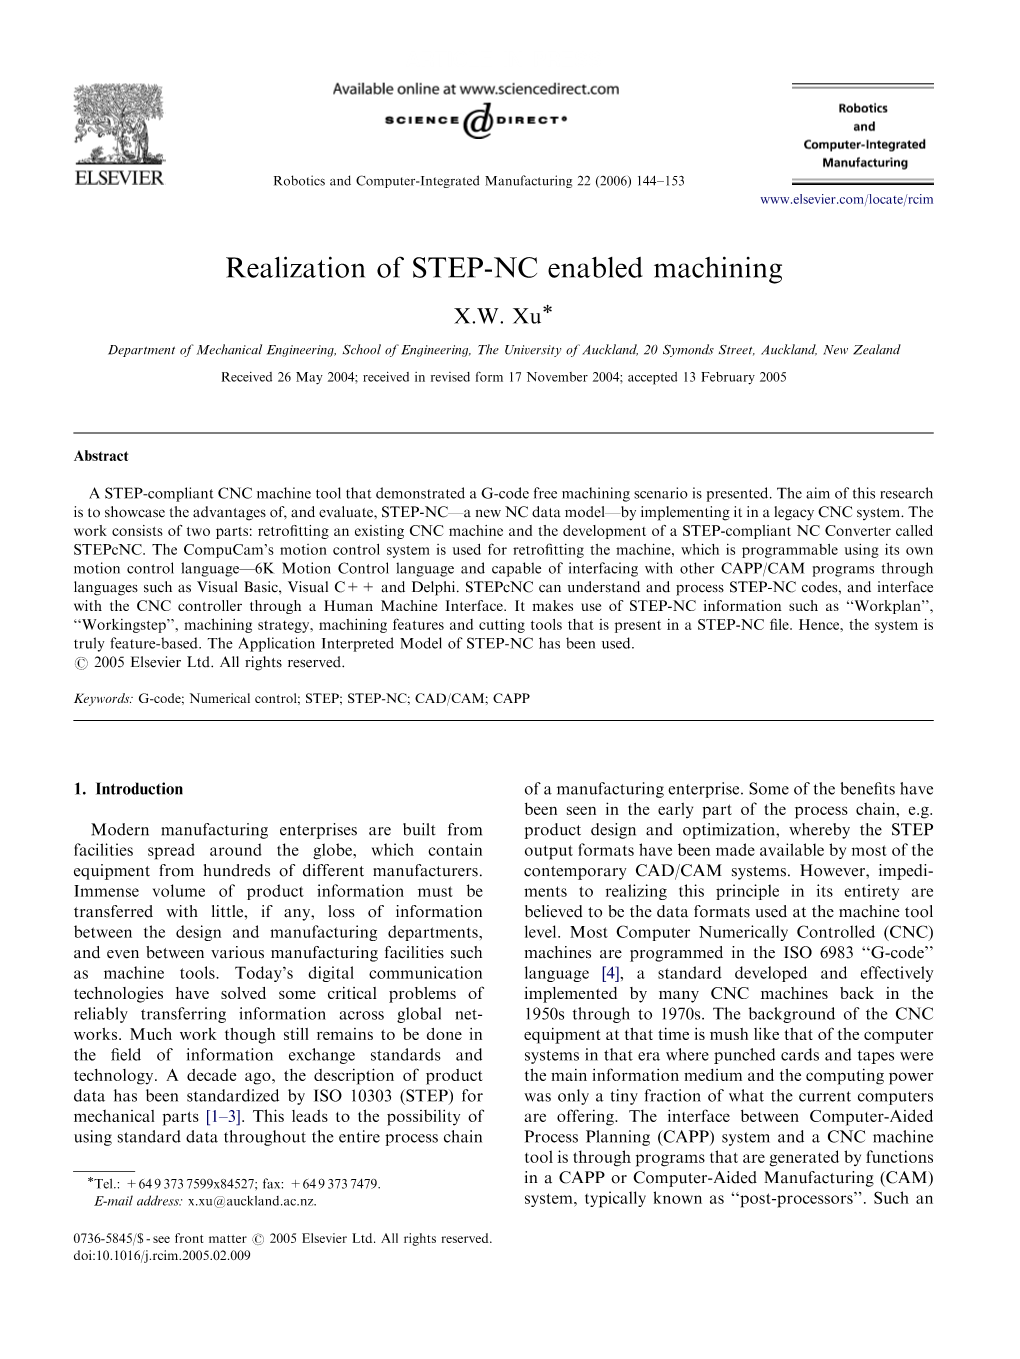 Realization of STEP-NC Enabled Machining